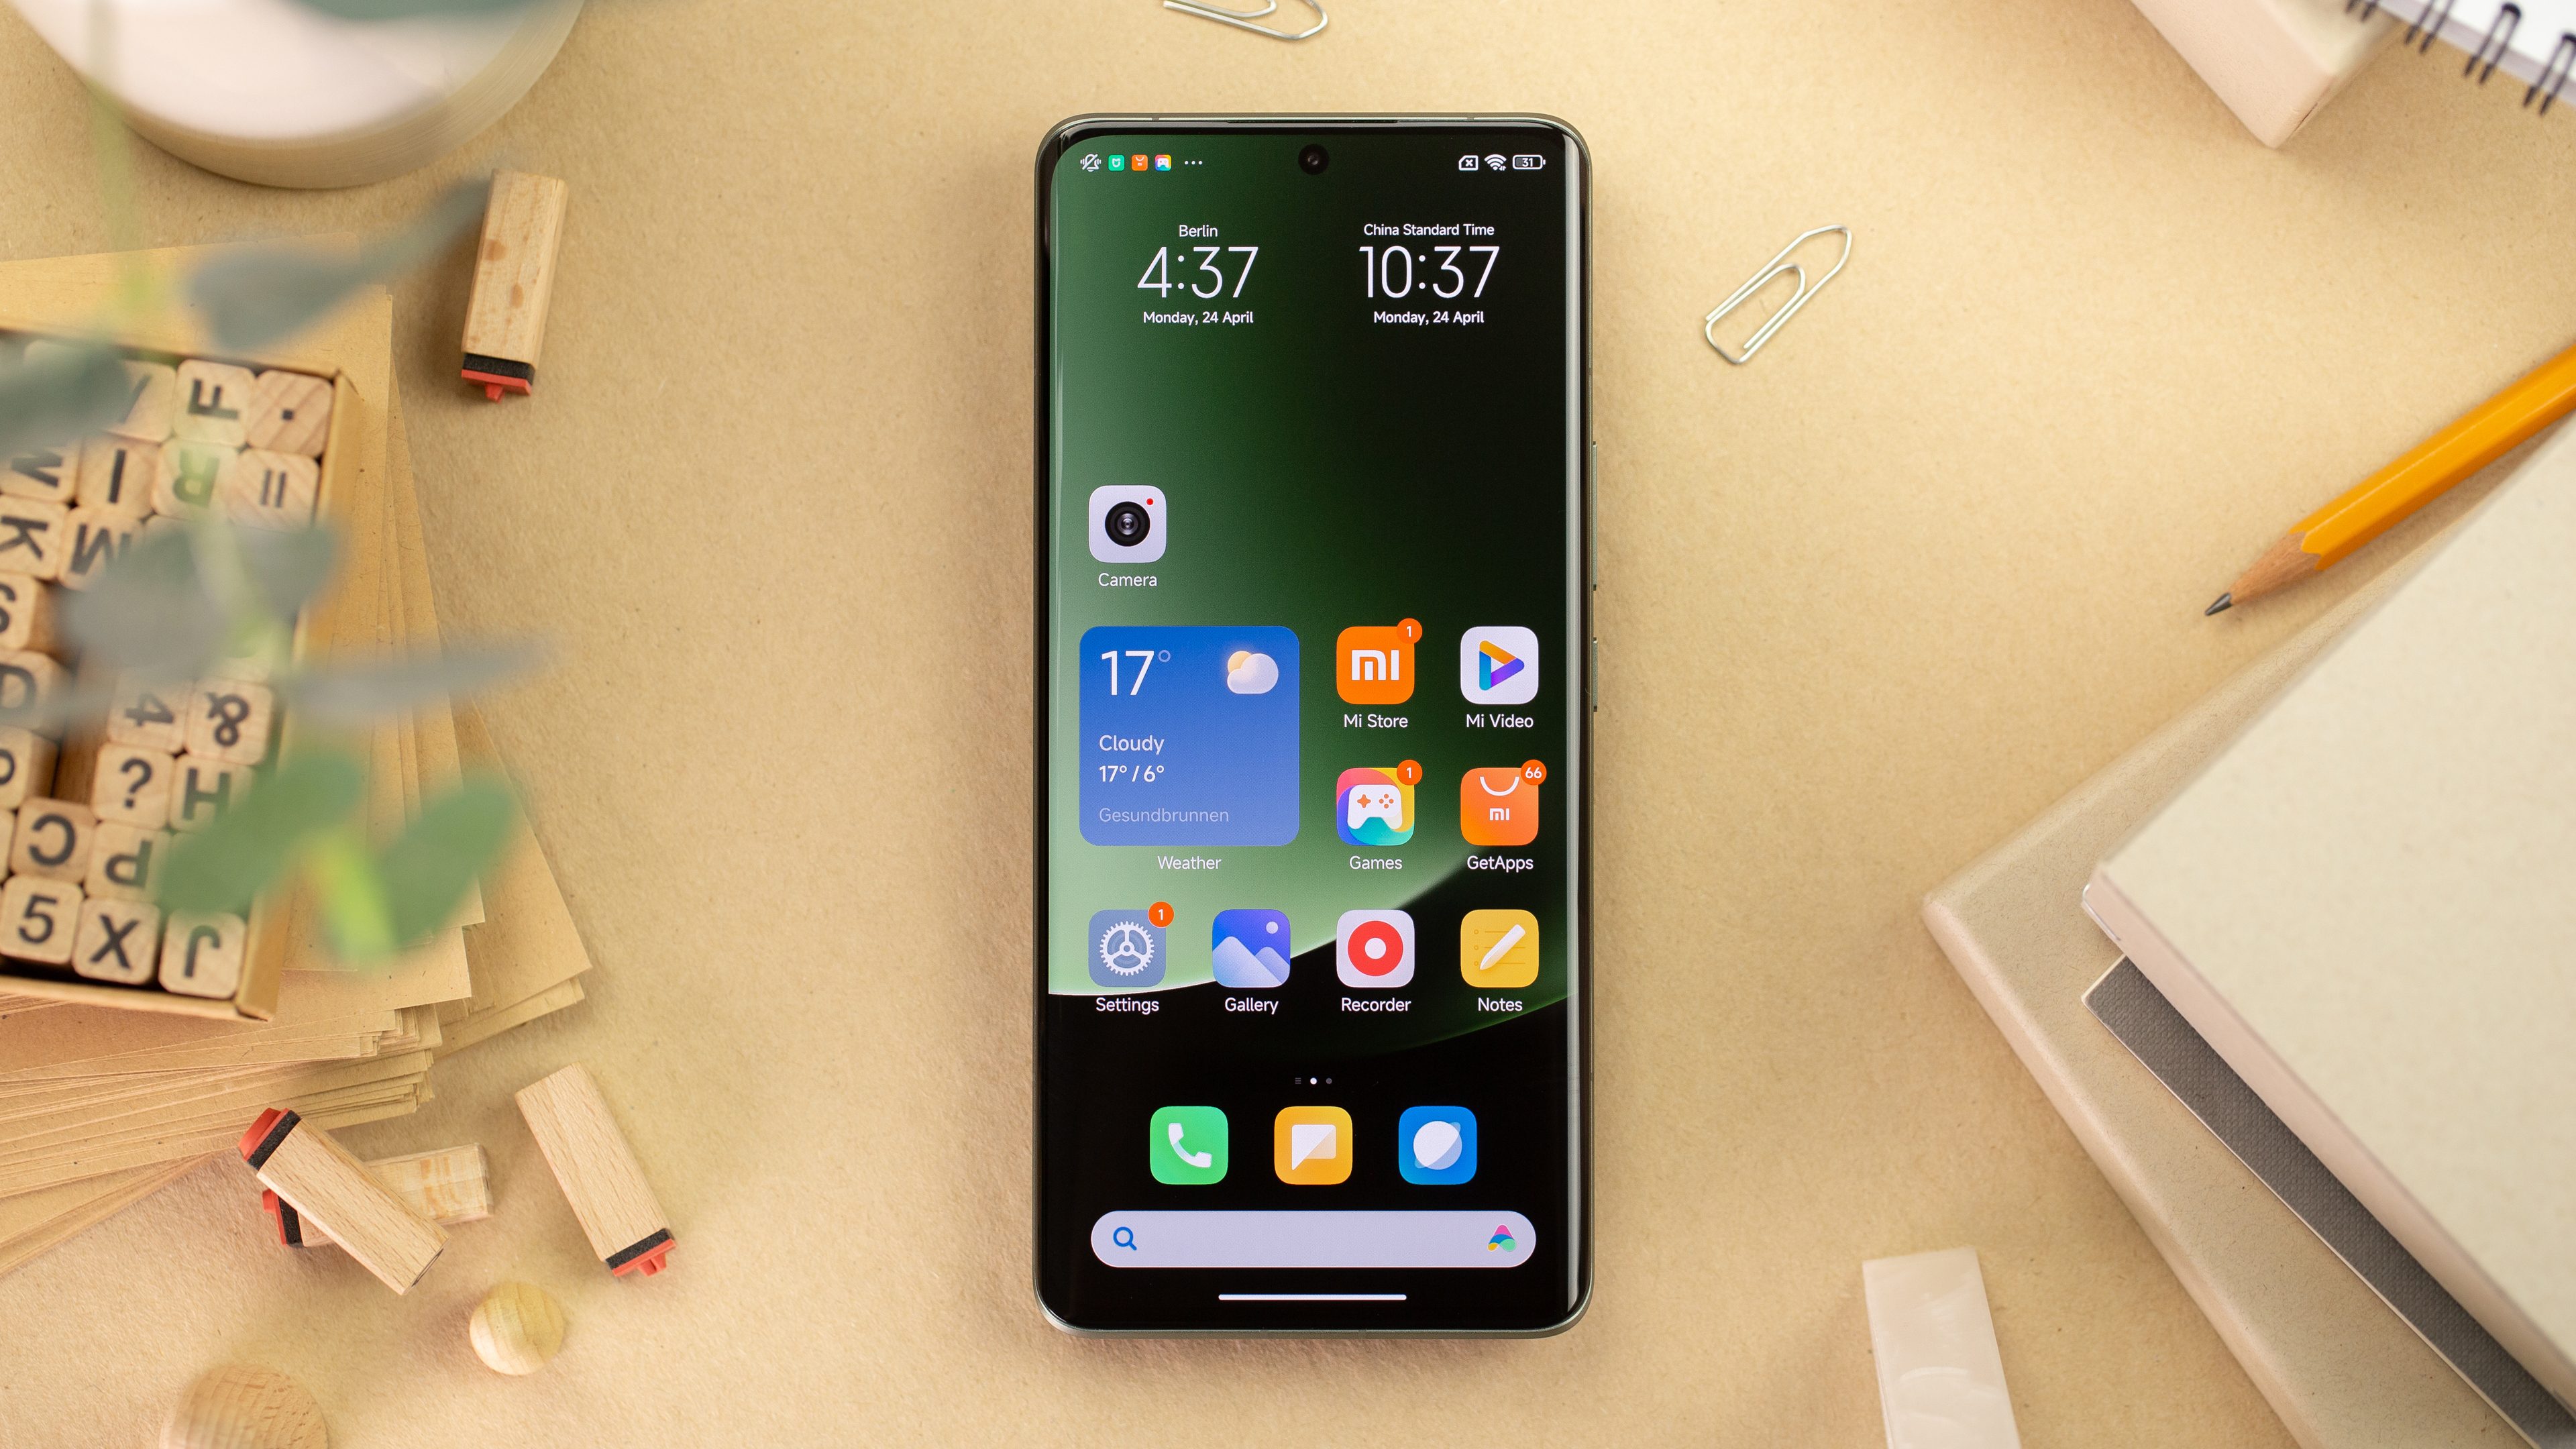 Xiaomi Home Screen Pro 8: New smart monitor launches with optional  battery-only mode -  News